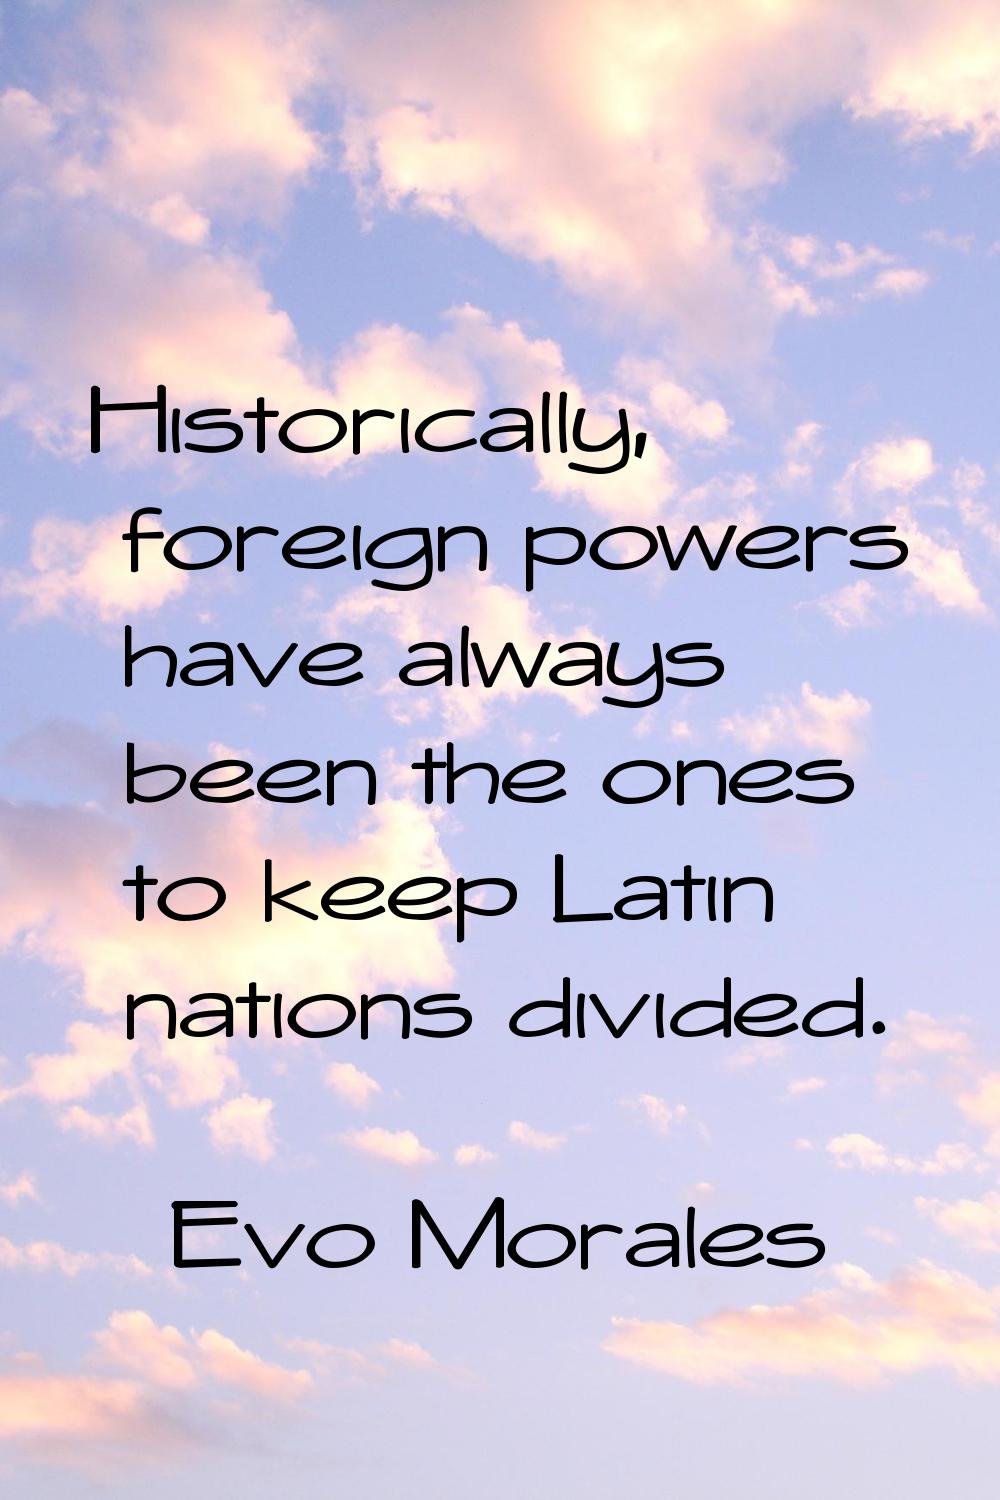 Historically, foreign powers have always been the ones to keep Latin nations divided.